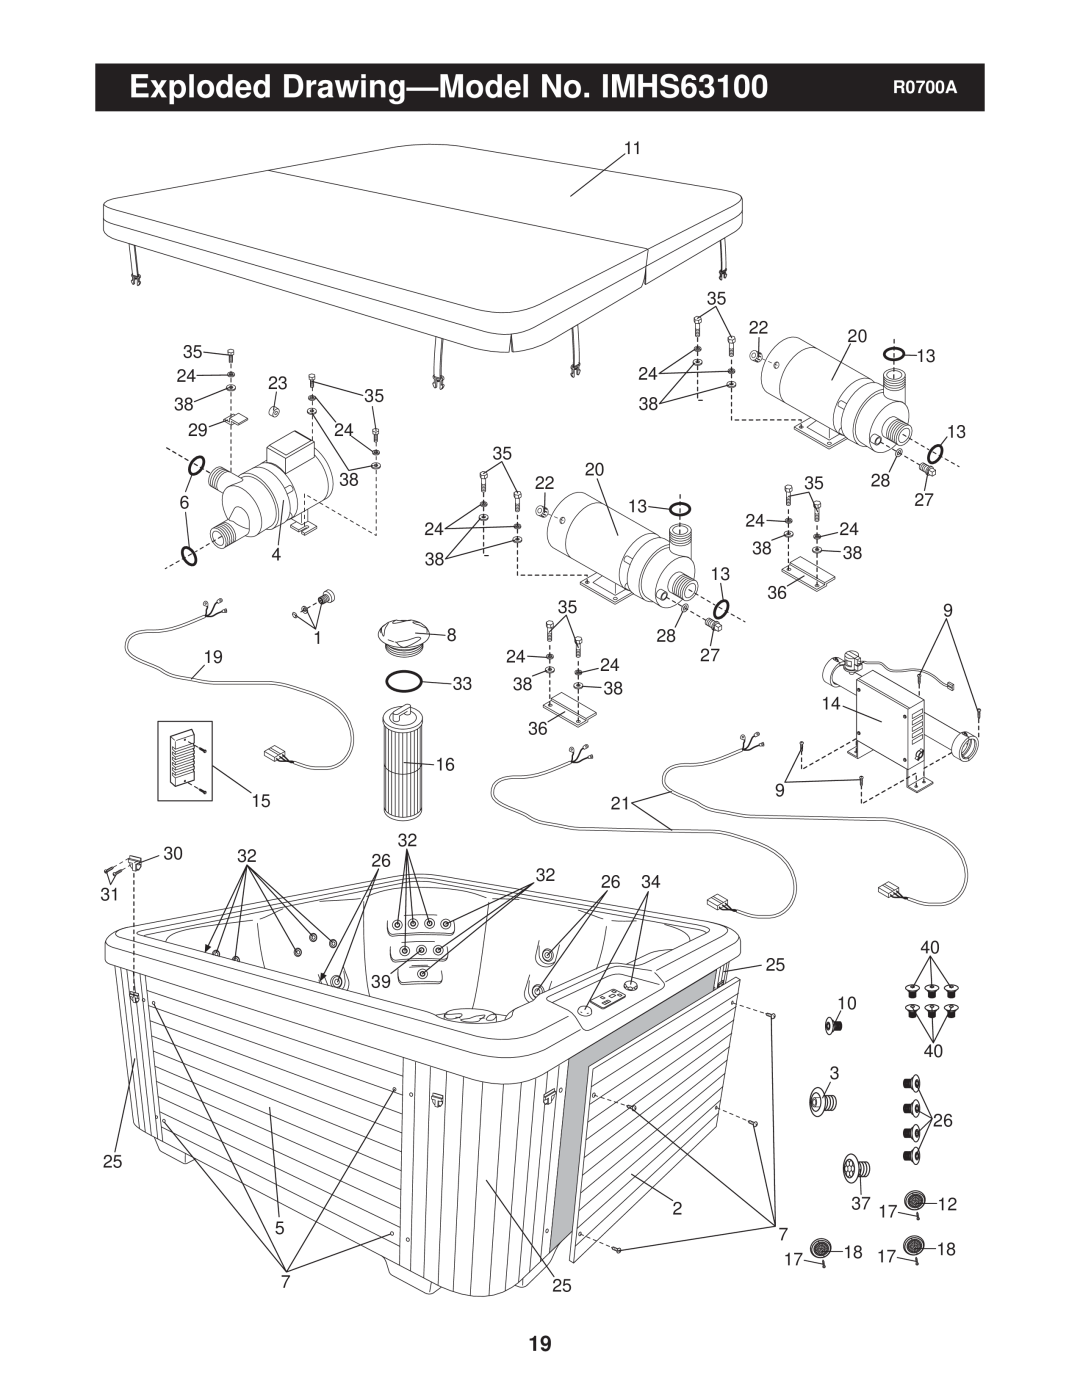 Image user manual Exploded Drawing-Model No. IMHS63100, R0700A 